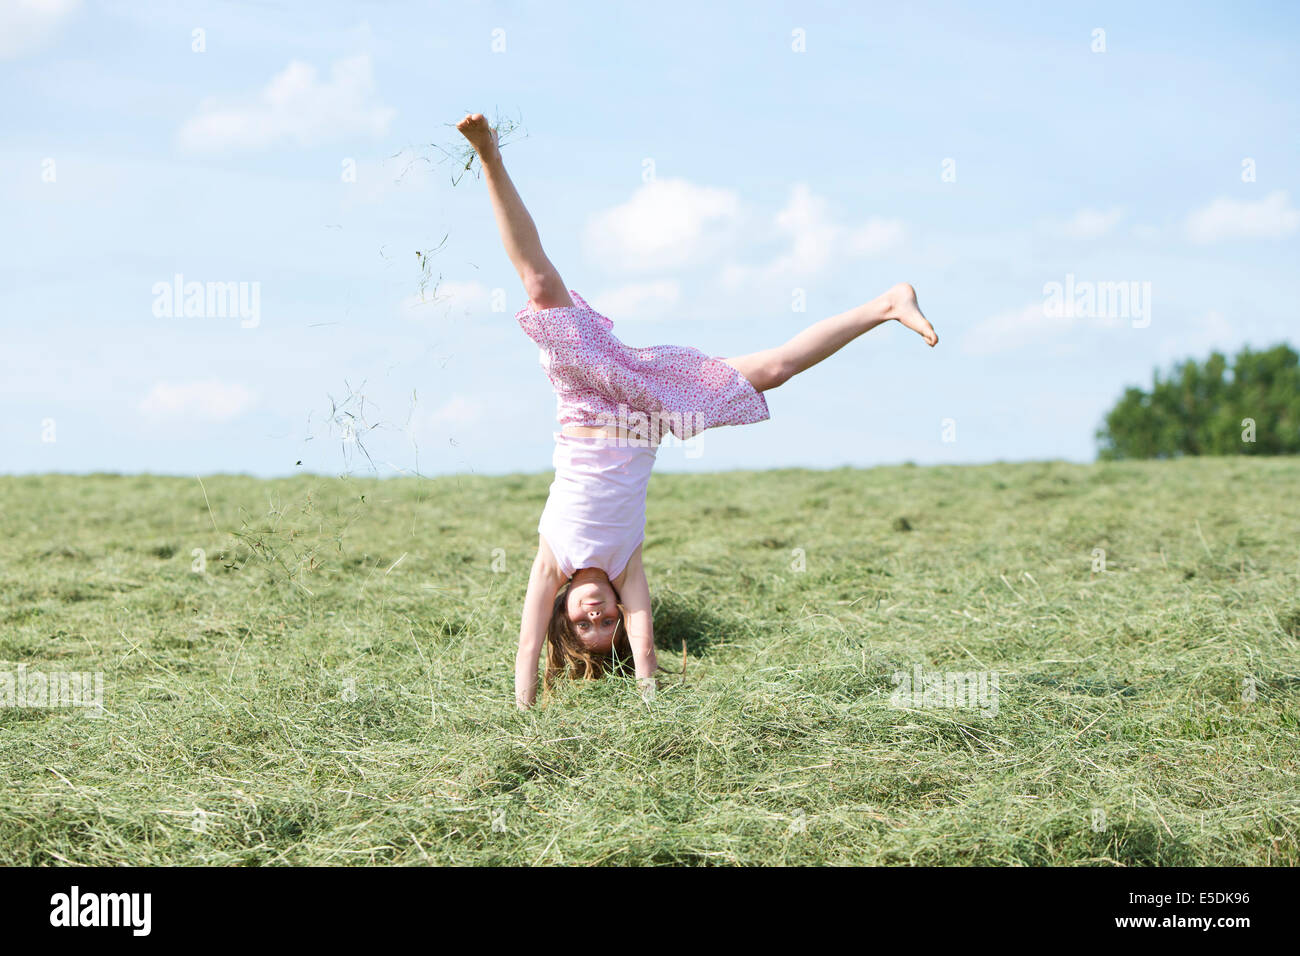 Germany, Bavaria, Young girl doing a cartwheel on meadow with hay Stock Photo